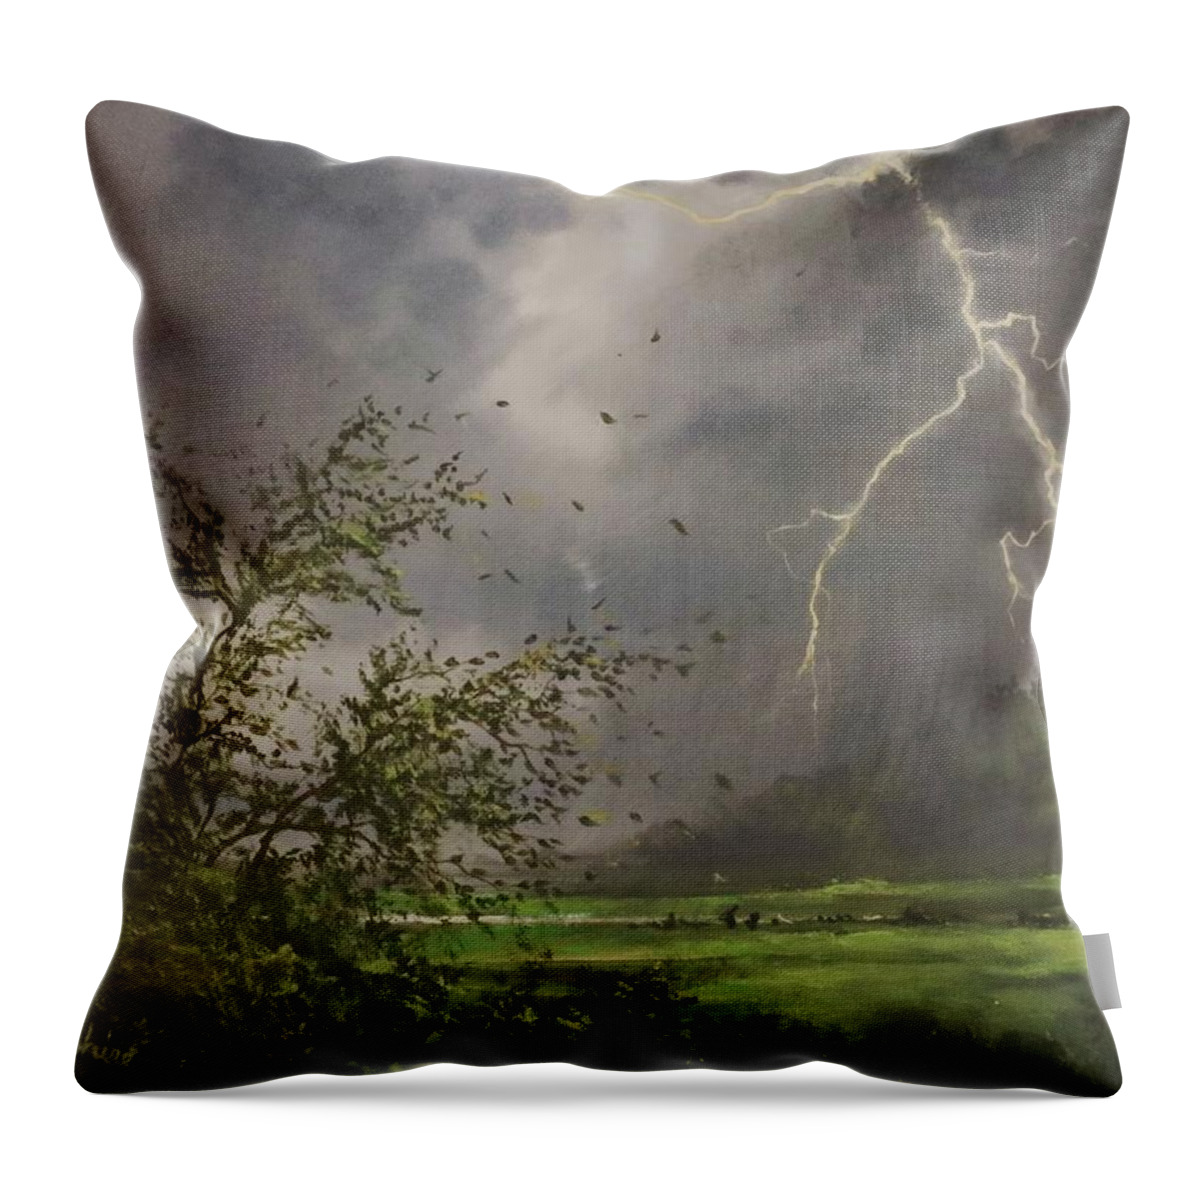 Storm Throw Pillow featuring the painting April Storm by Tom Shropshire